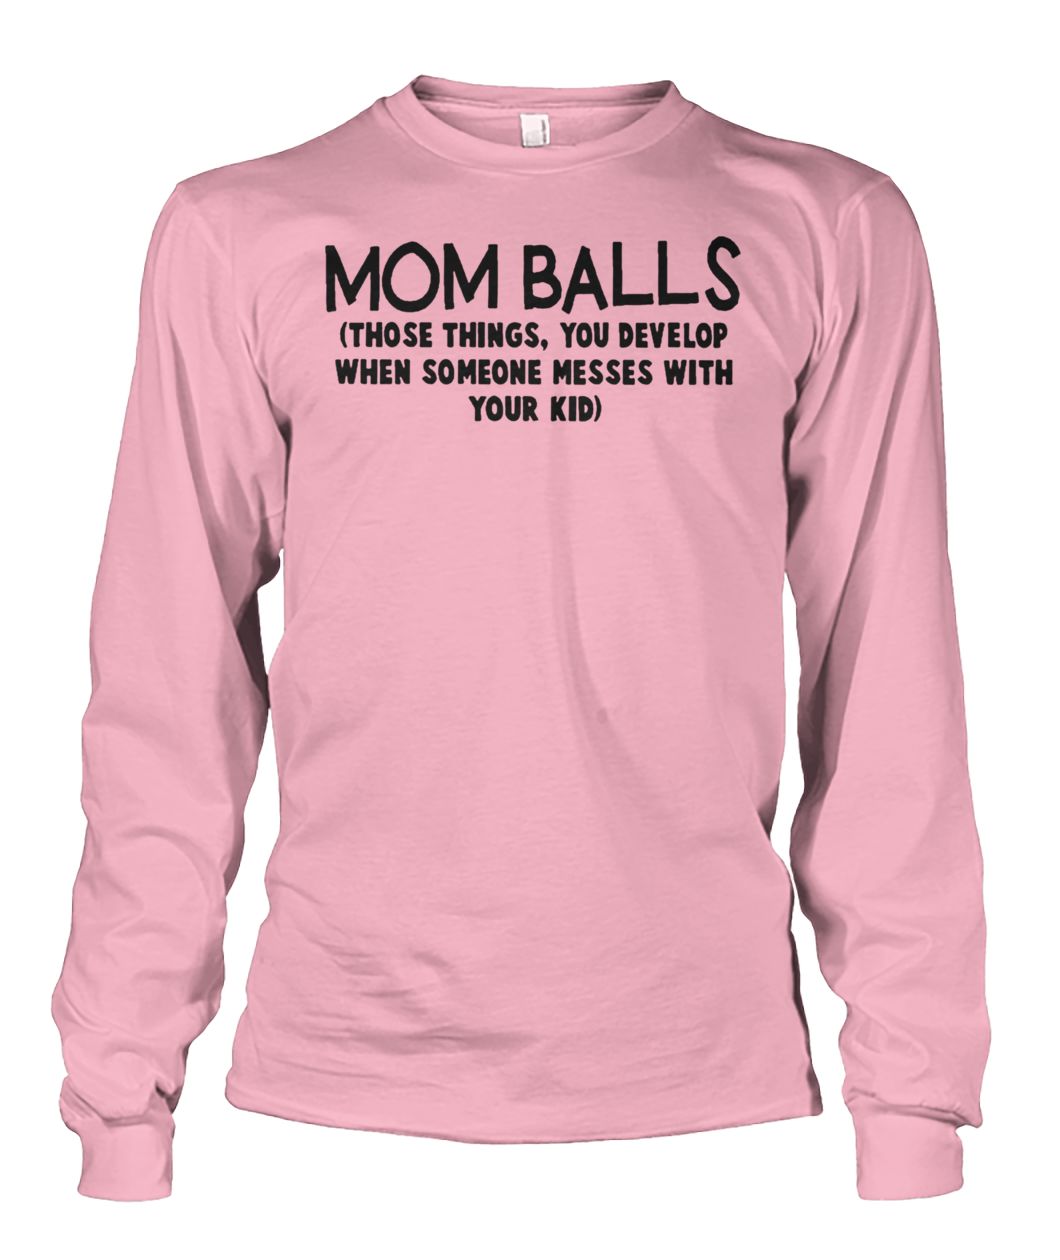 Mom balls those things you develop when someone messes with your kid unisex long sleeve